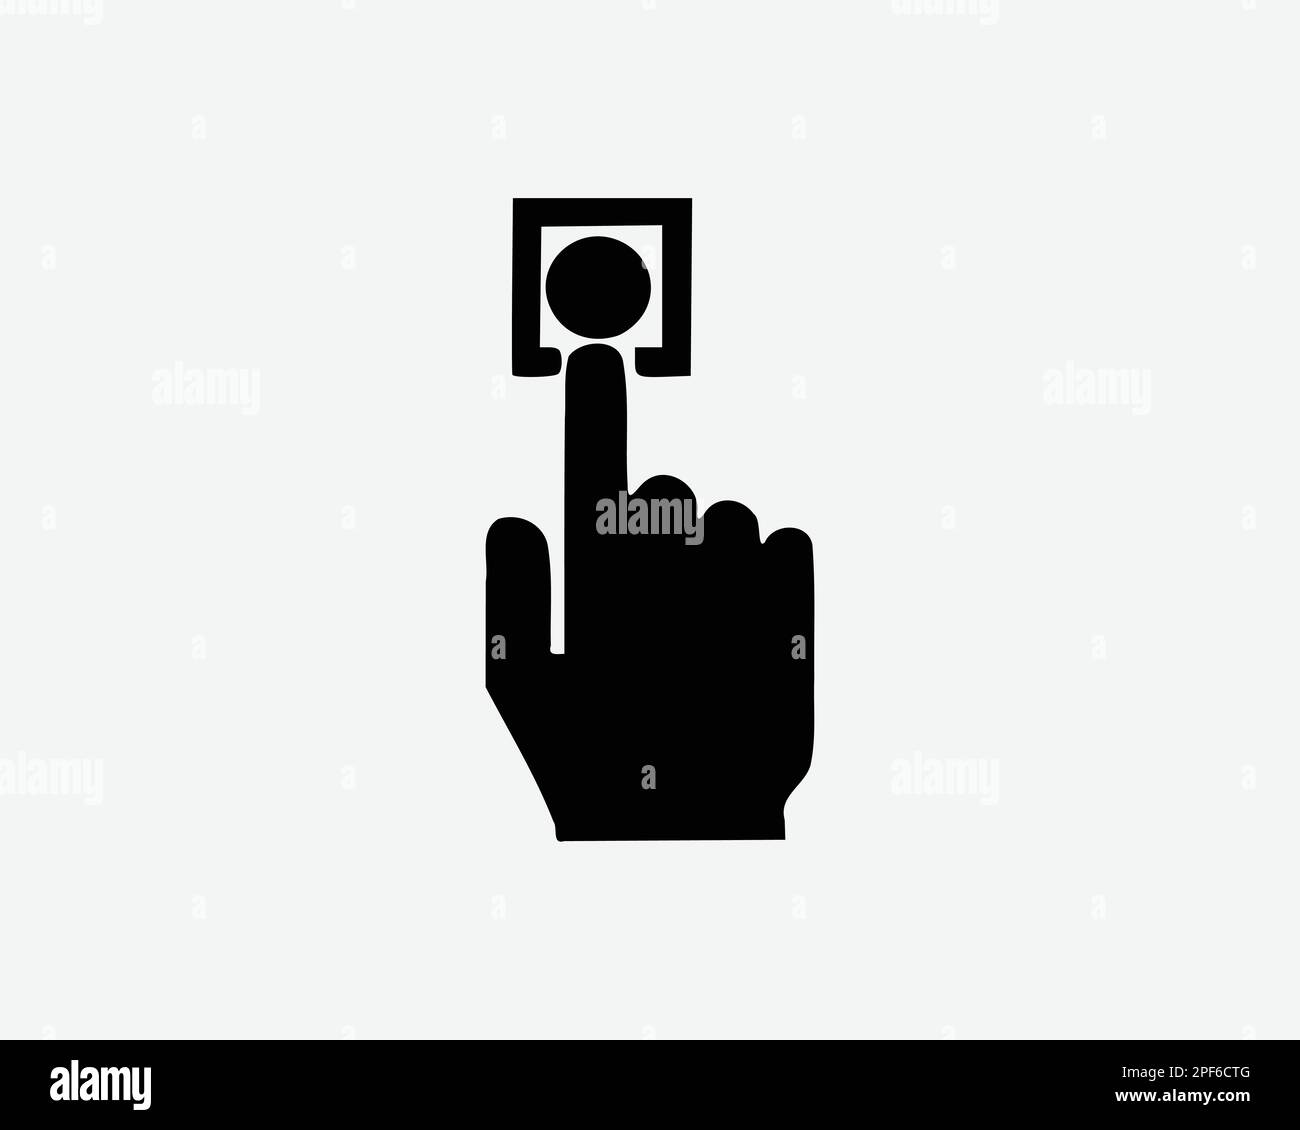 Push Button Call Hand Finger Press Click Point Ring Doorbell Black White Silhouette Sign Symbol Icon Clipart Artwork Pictogram Illustration Vector Stock Vector